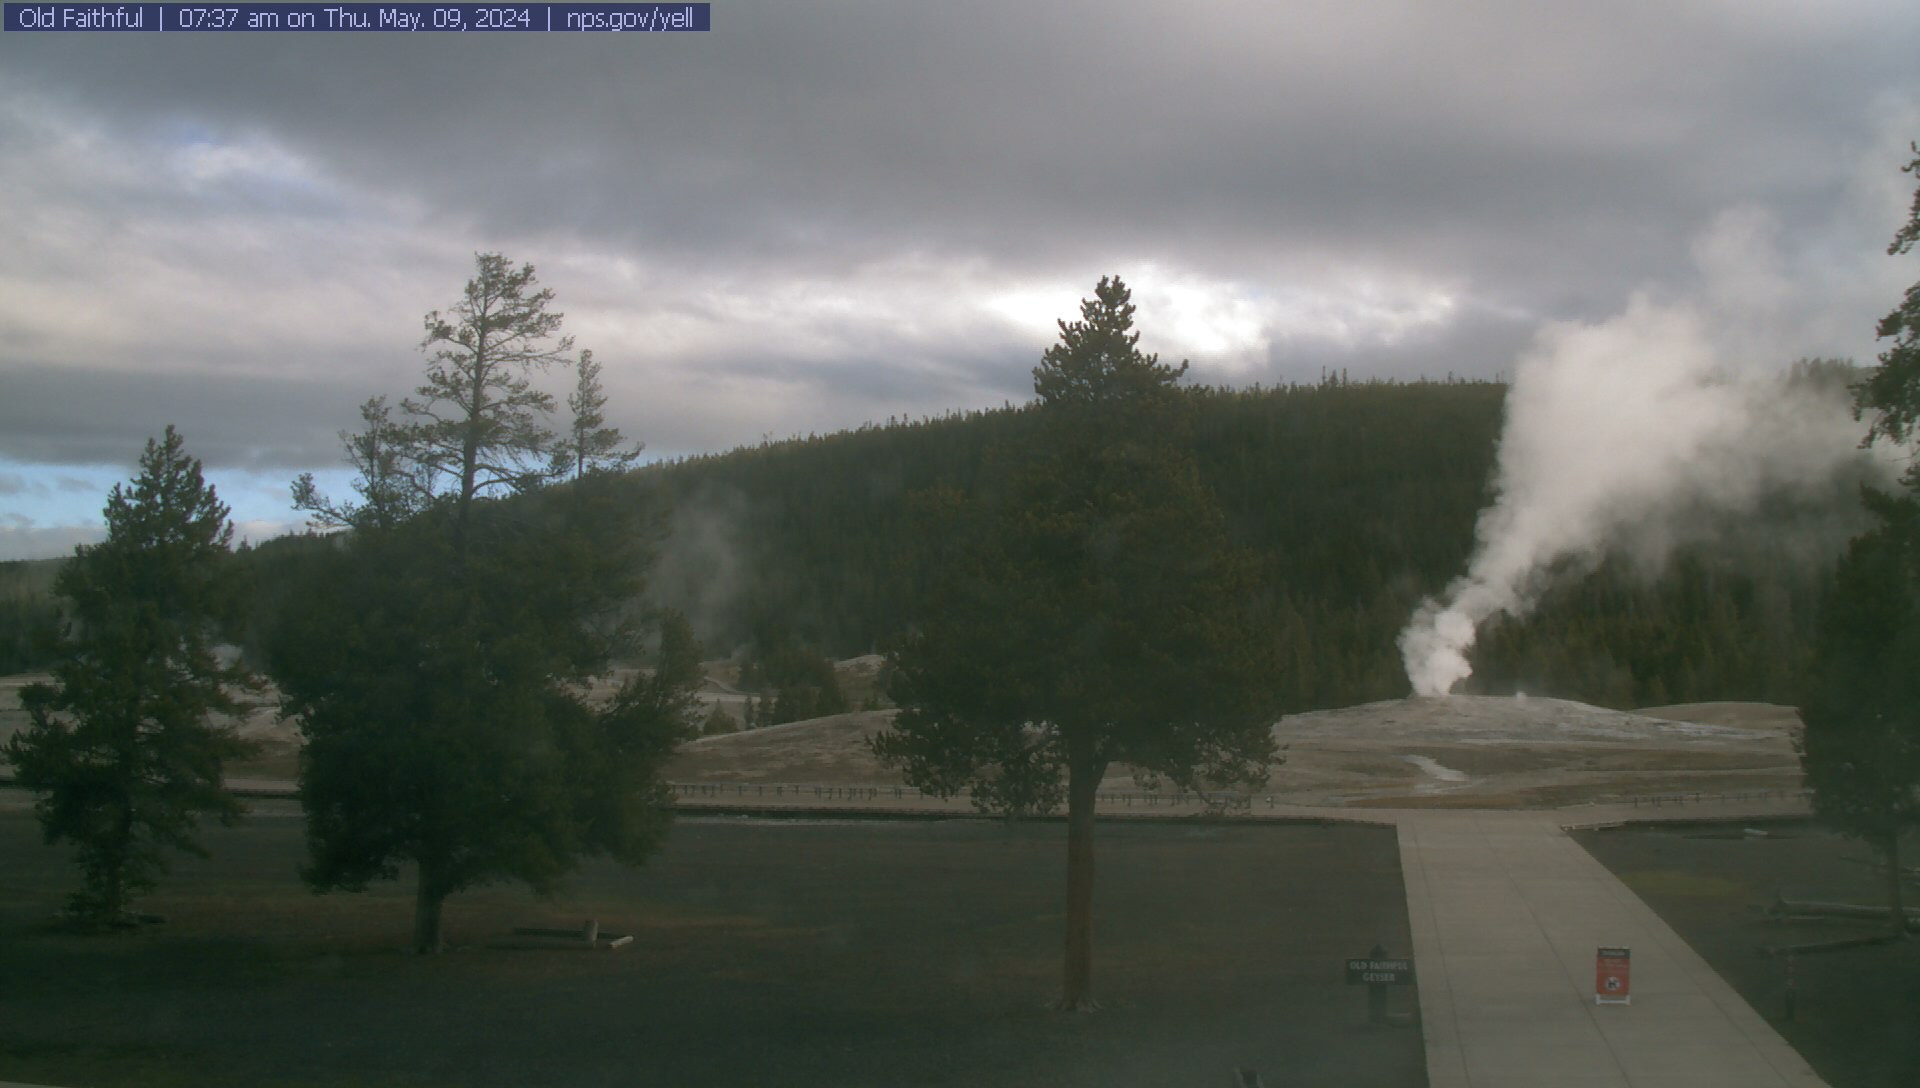 Current view of Old Faithful from the Old Faithful Visitor Education Center